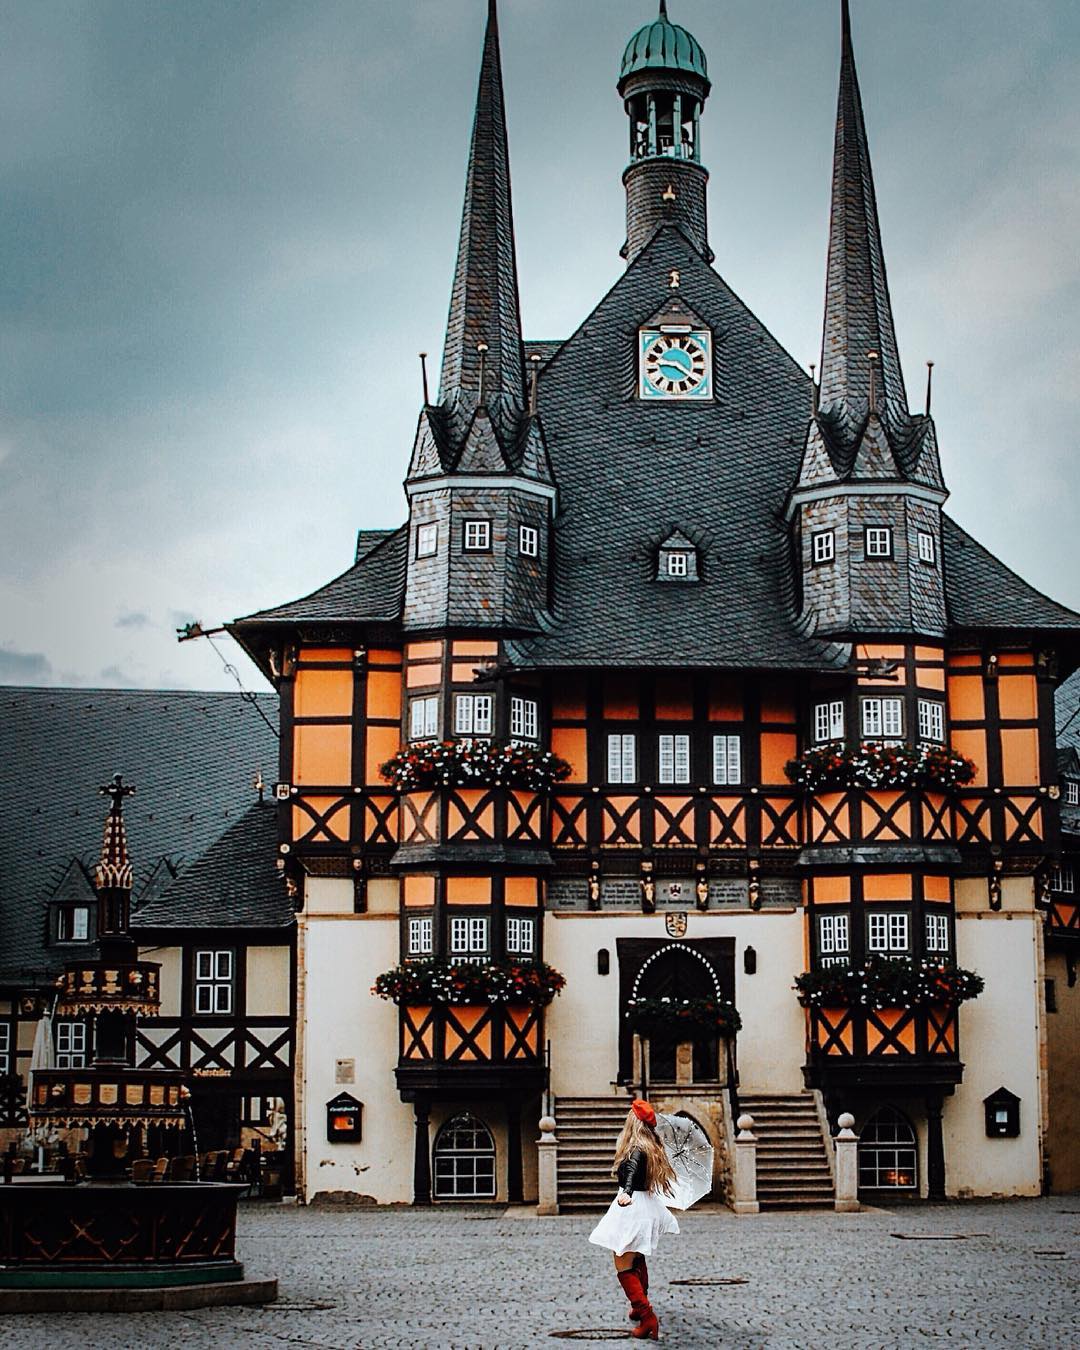 Wonderful Wernigerode 🤩
Enjoy the Sunday peeps ❤️❤️
•
Travel Tip: should you plan to visit this place (town hall) you should consider going there when all the shops around are closed, cause otherwise there will be crowds of people on your pic. Go before the opening hours in the morning, in the evening or early on sundays 👌🏻
And check before going the events in Wernigerode, cause it can happen, that there’s some kind of market (as there is almost every second week a market) just in front the town hall- no pic possible 😱
.
.
.📸by me with tripod 😂
.
.
#wernigerode #rathauswernigerode #harz #harzmountains #germany #deutschland #traveladvice #tripadvisor #reisetips #visitgermany #travelblogger #blogpost #travel #explore #roamtheplanet #exploretheworld #travelphotography #travelgirl #girlsthatwander #iamtb #sheisnotlost